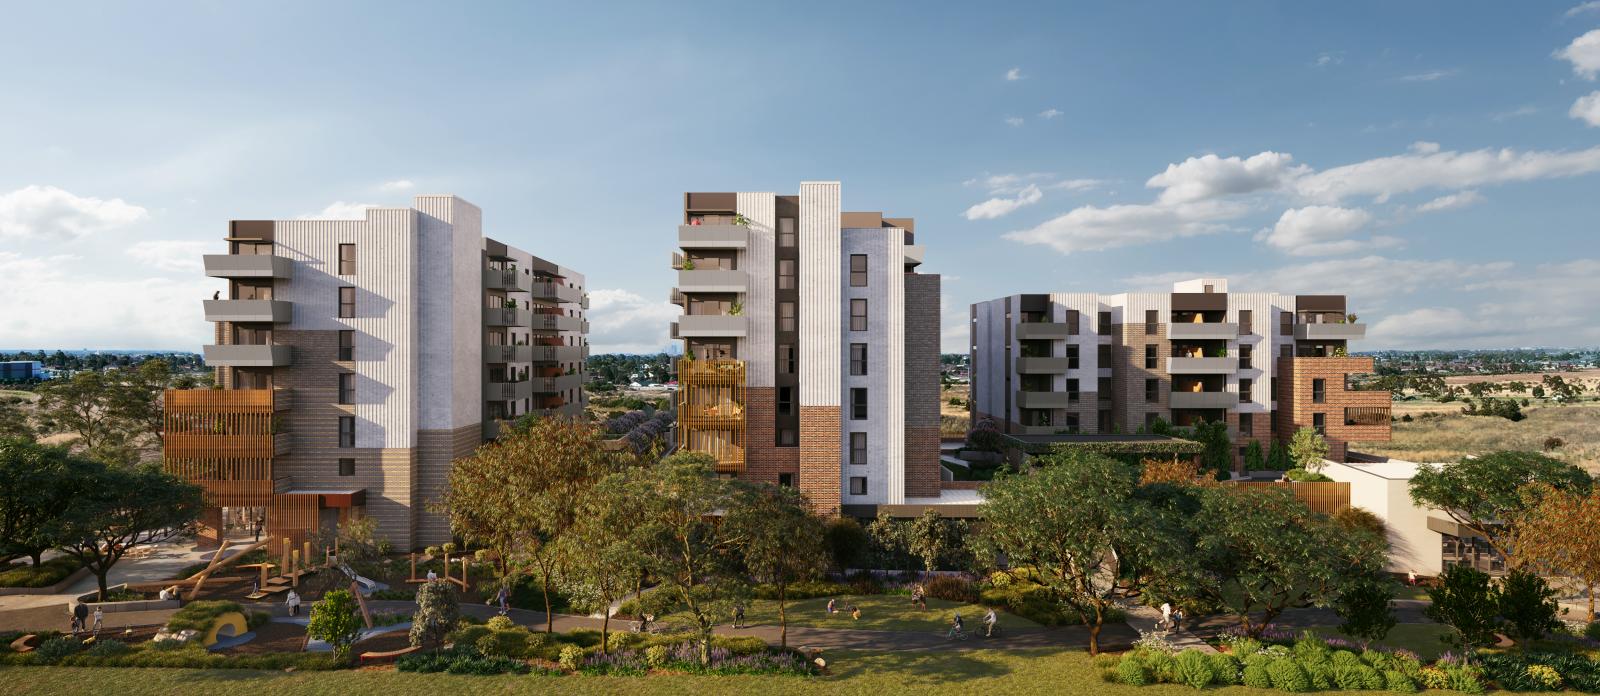 New Epping Stage 1 Residences